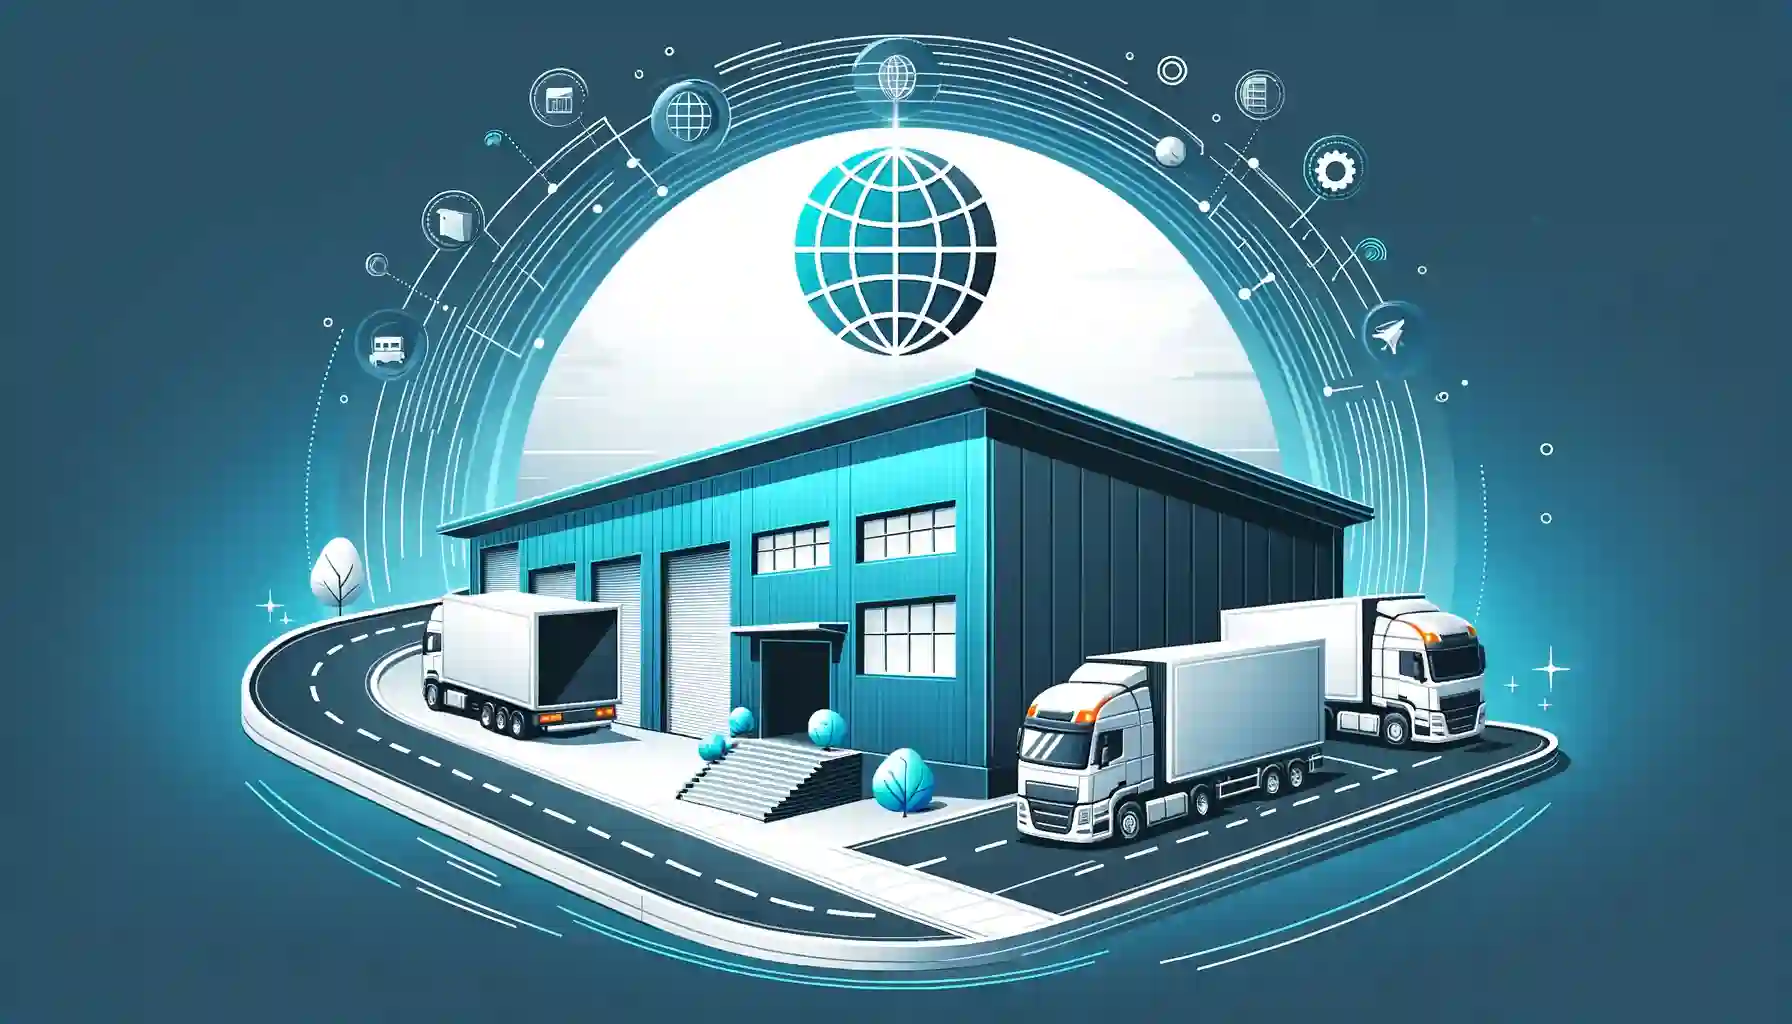 Illustration-of-a-stylized-warehouse-exterior-with-a-dynamic-modern-design-with-trucks-parked-outside-and-a-globe-icon-overhead-representing-global